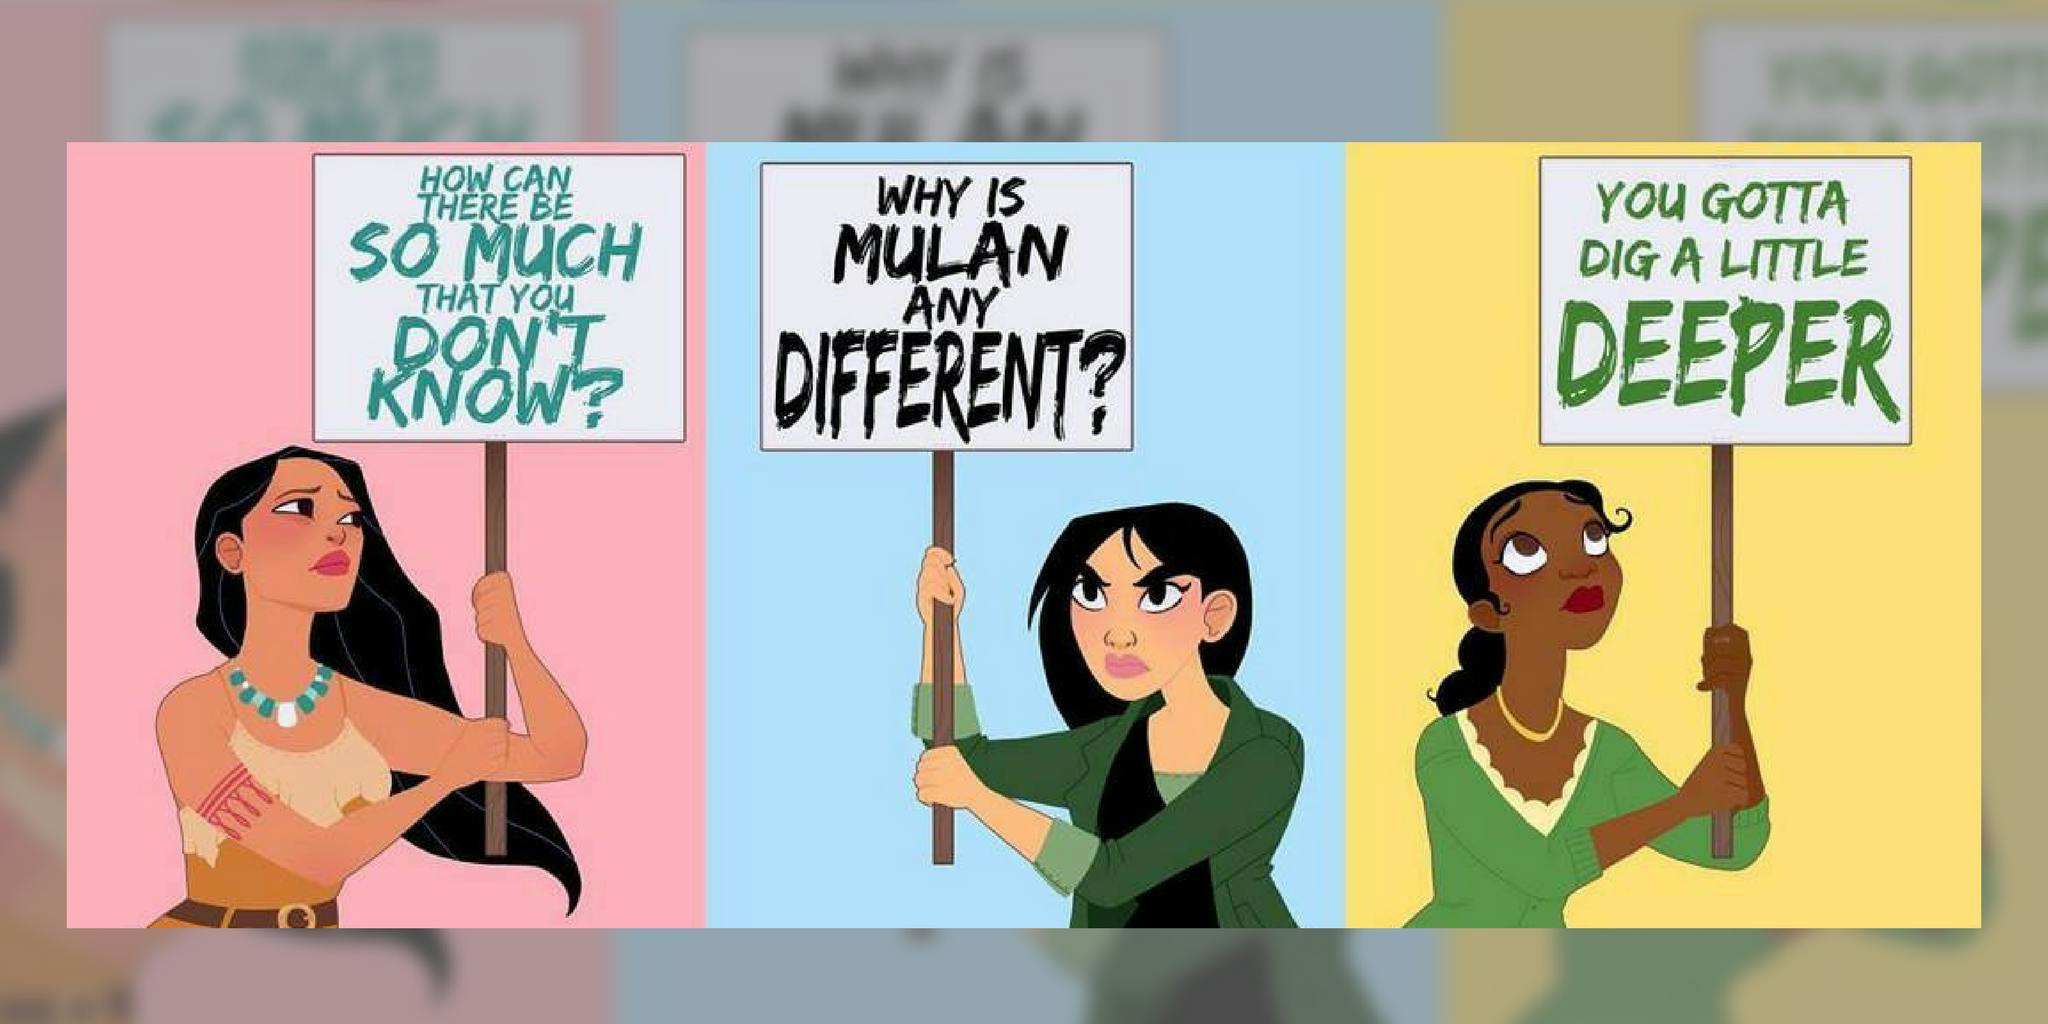 Disney princesses illustrated as protesters by Amanda Allen Niday